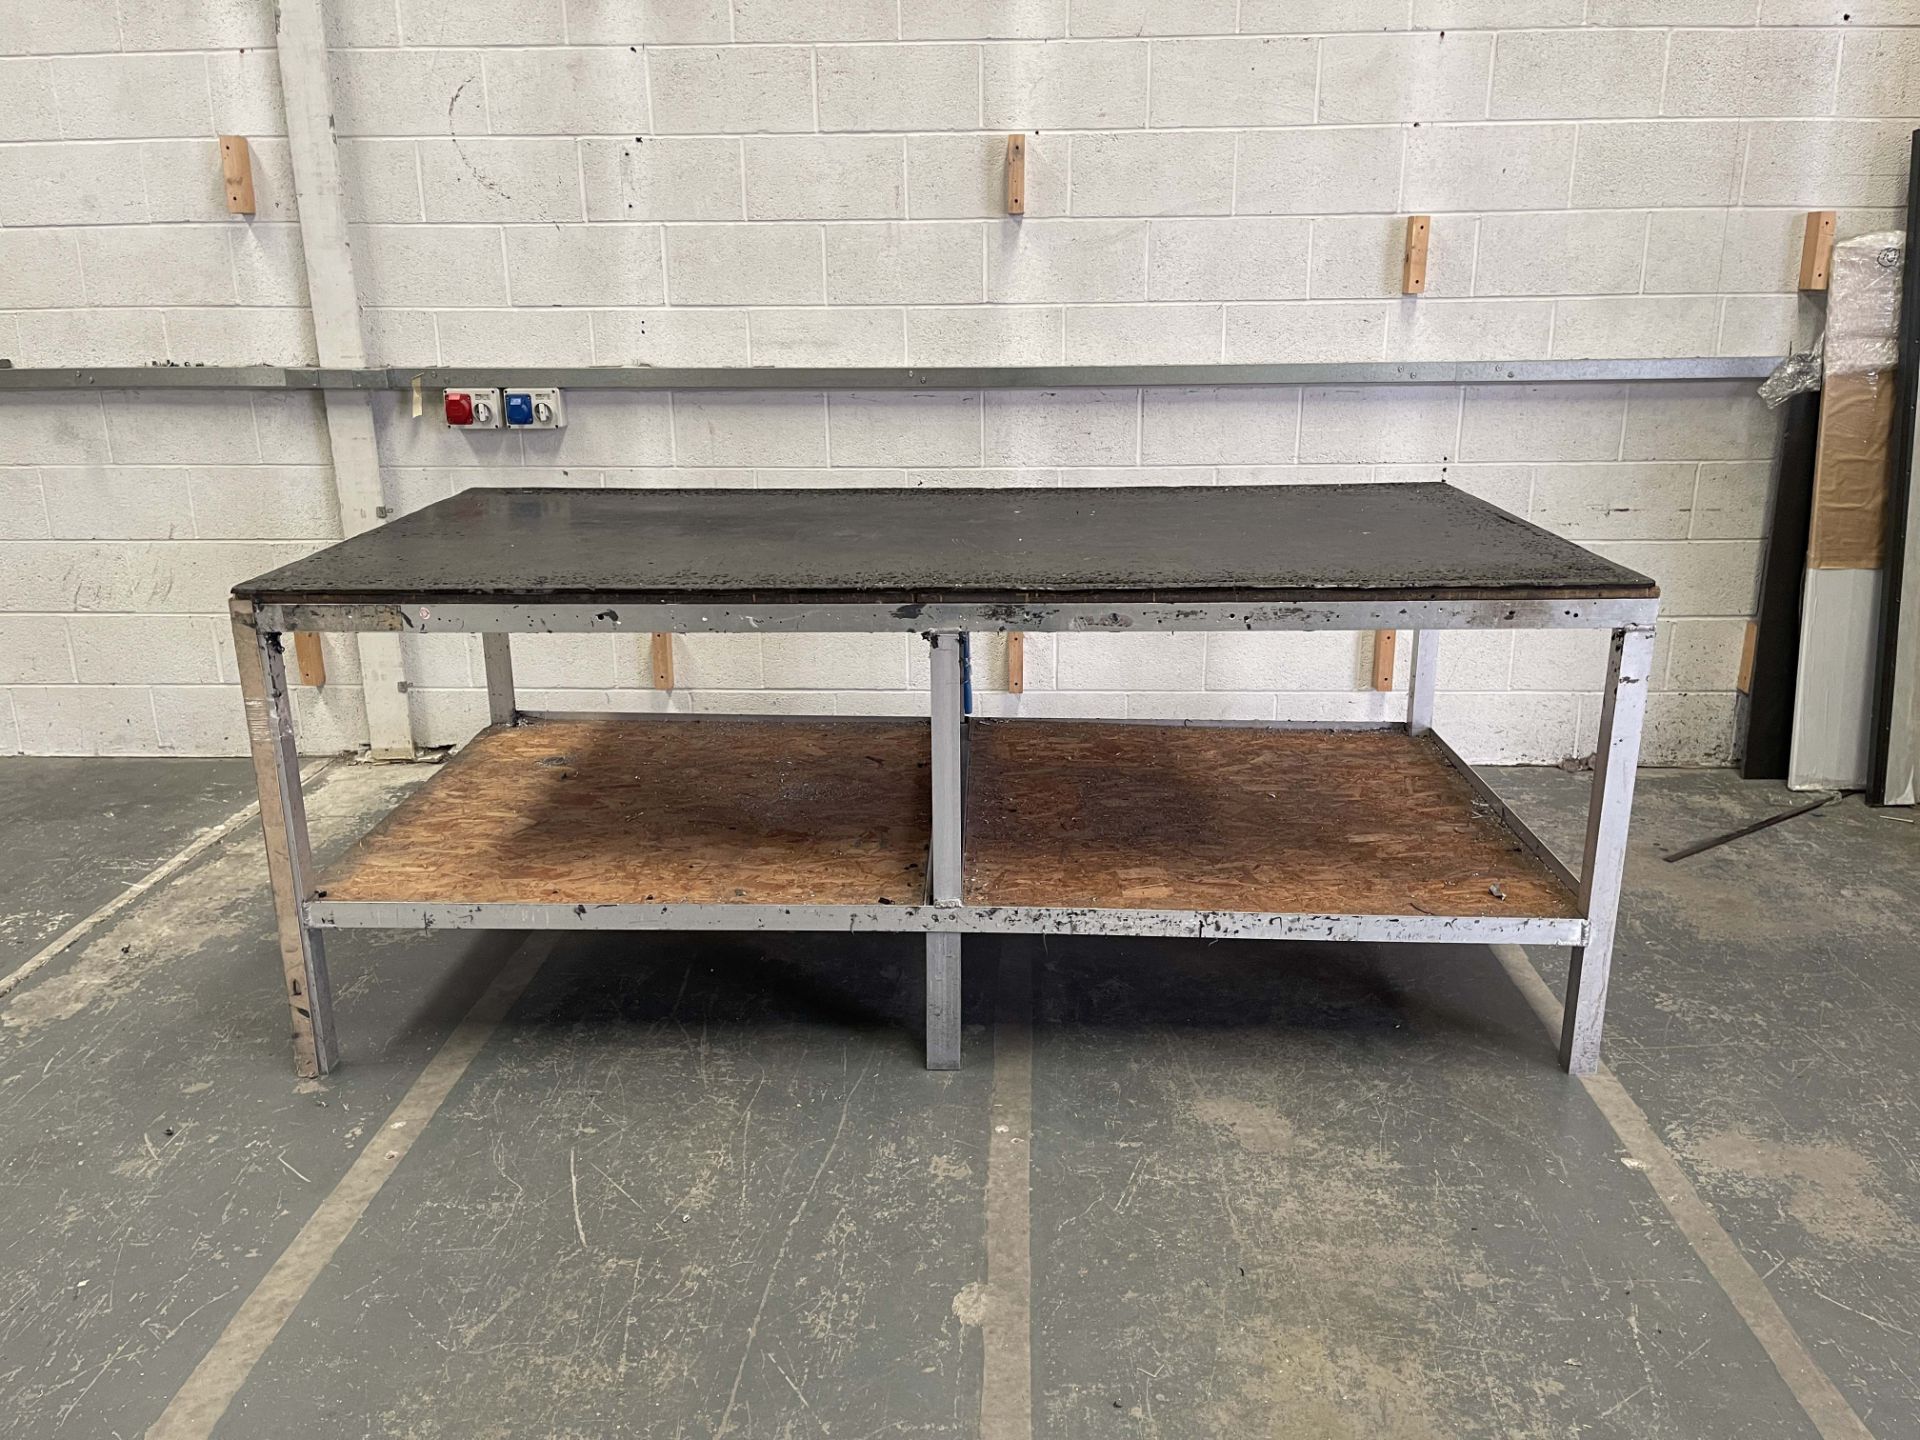 Aluminium Workbench With Rubber Top. Size: 8' x 4' x 3'1" High.